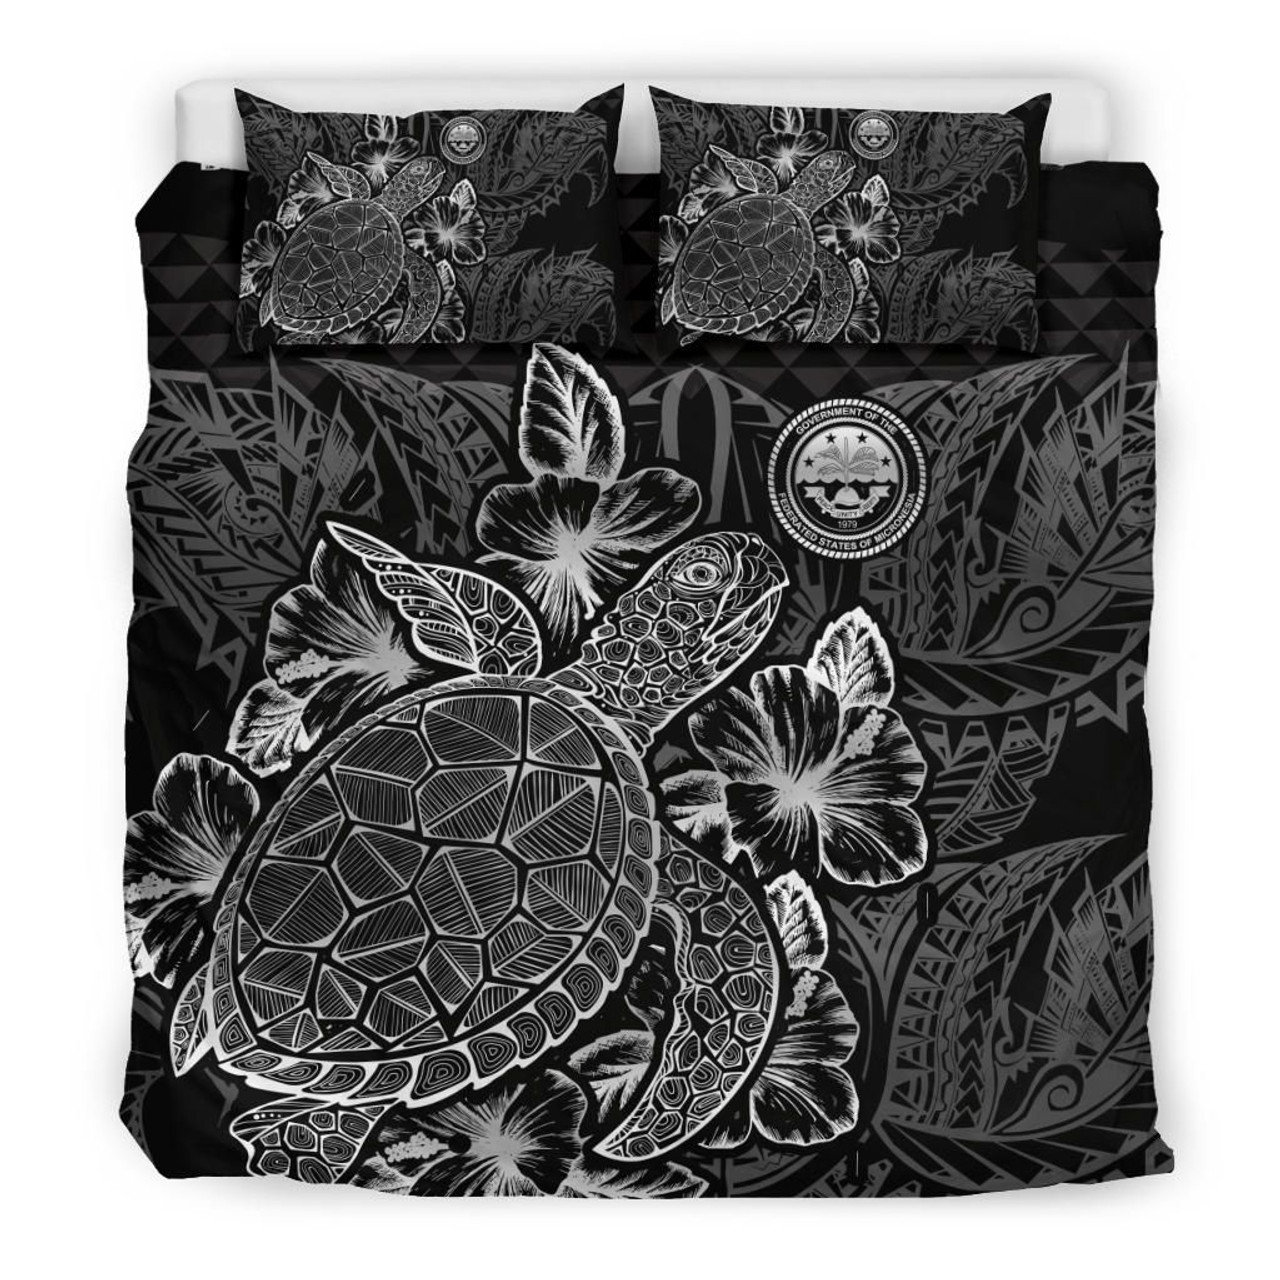 Polynesian Bedding Set - Federated States Of Micronesia Duvet Cover Set Black Color 1